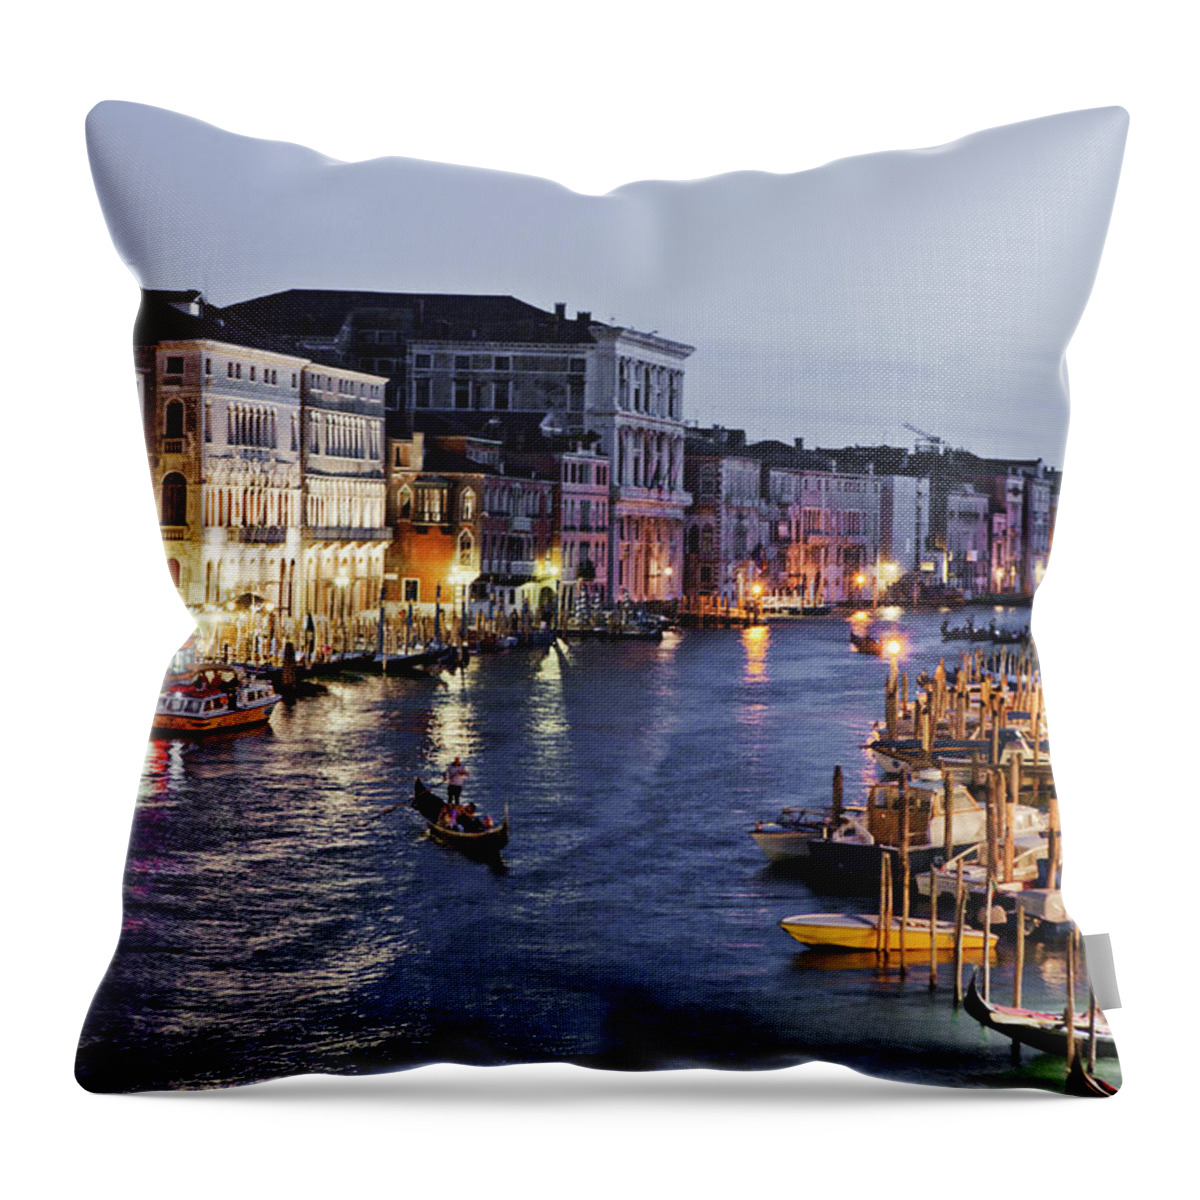 Built Structure Throw Pillow featuring the photograph Venice Cityscape by By Matthew Heptinstall